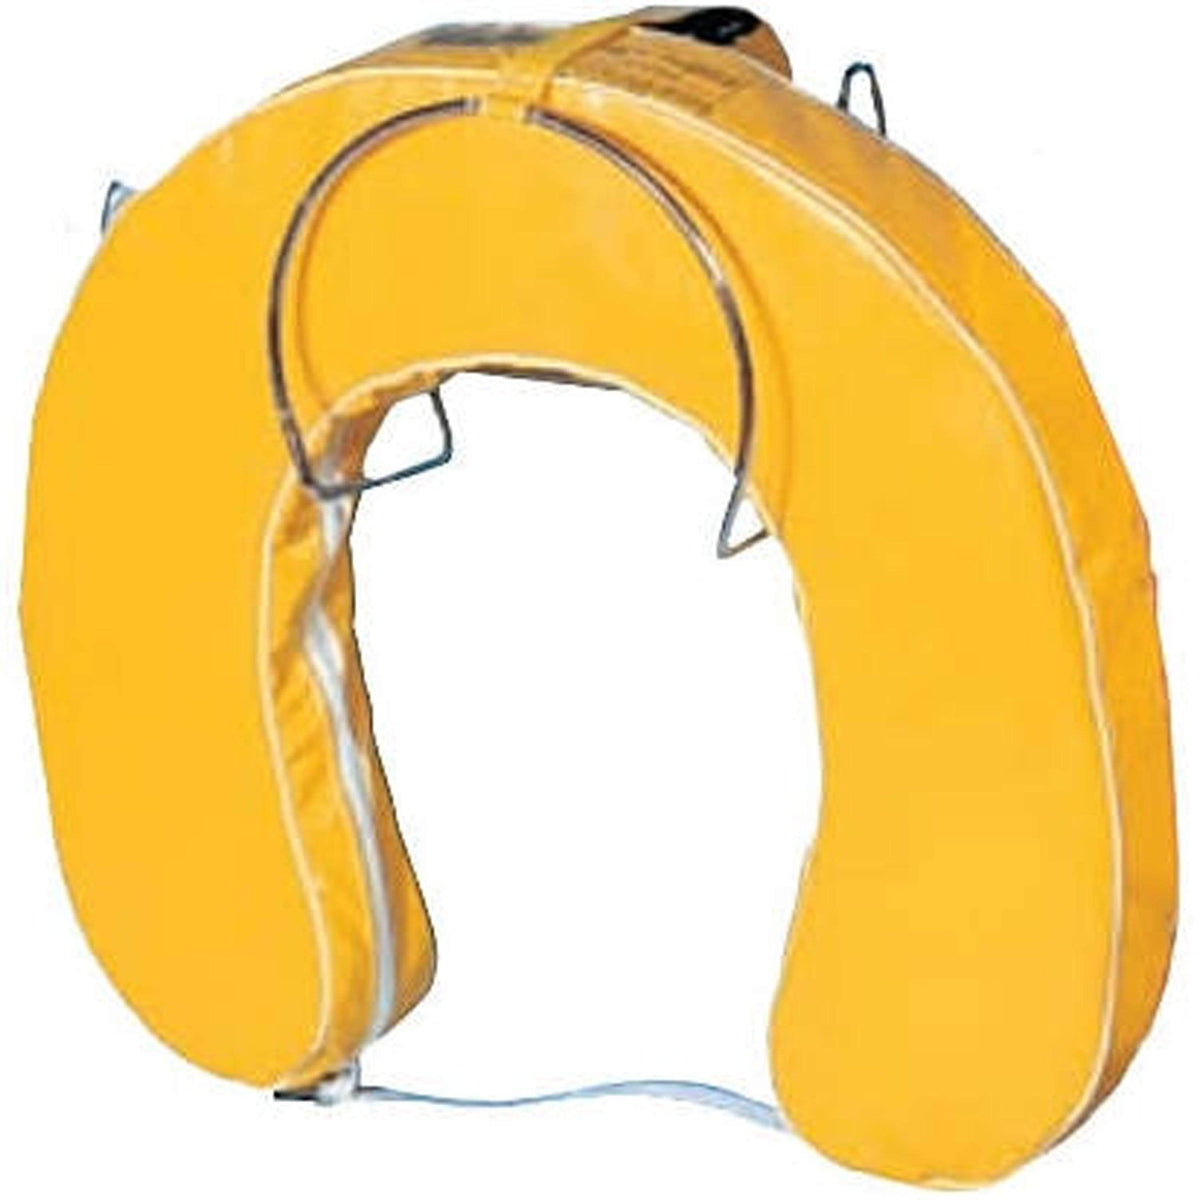 Cal-june Not Qualified for Free Shipping Cal-June Standard Horseshoe Buoy Pony Yellow #940